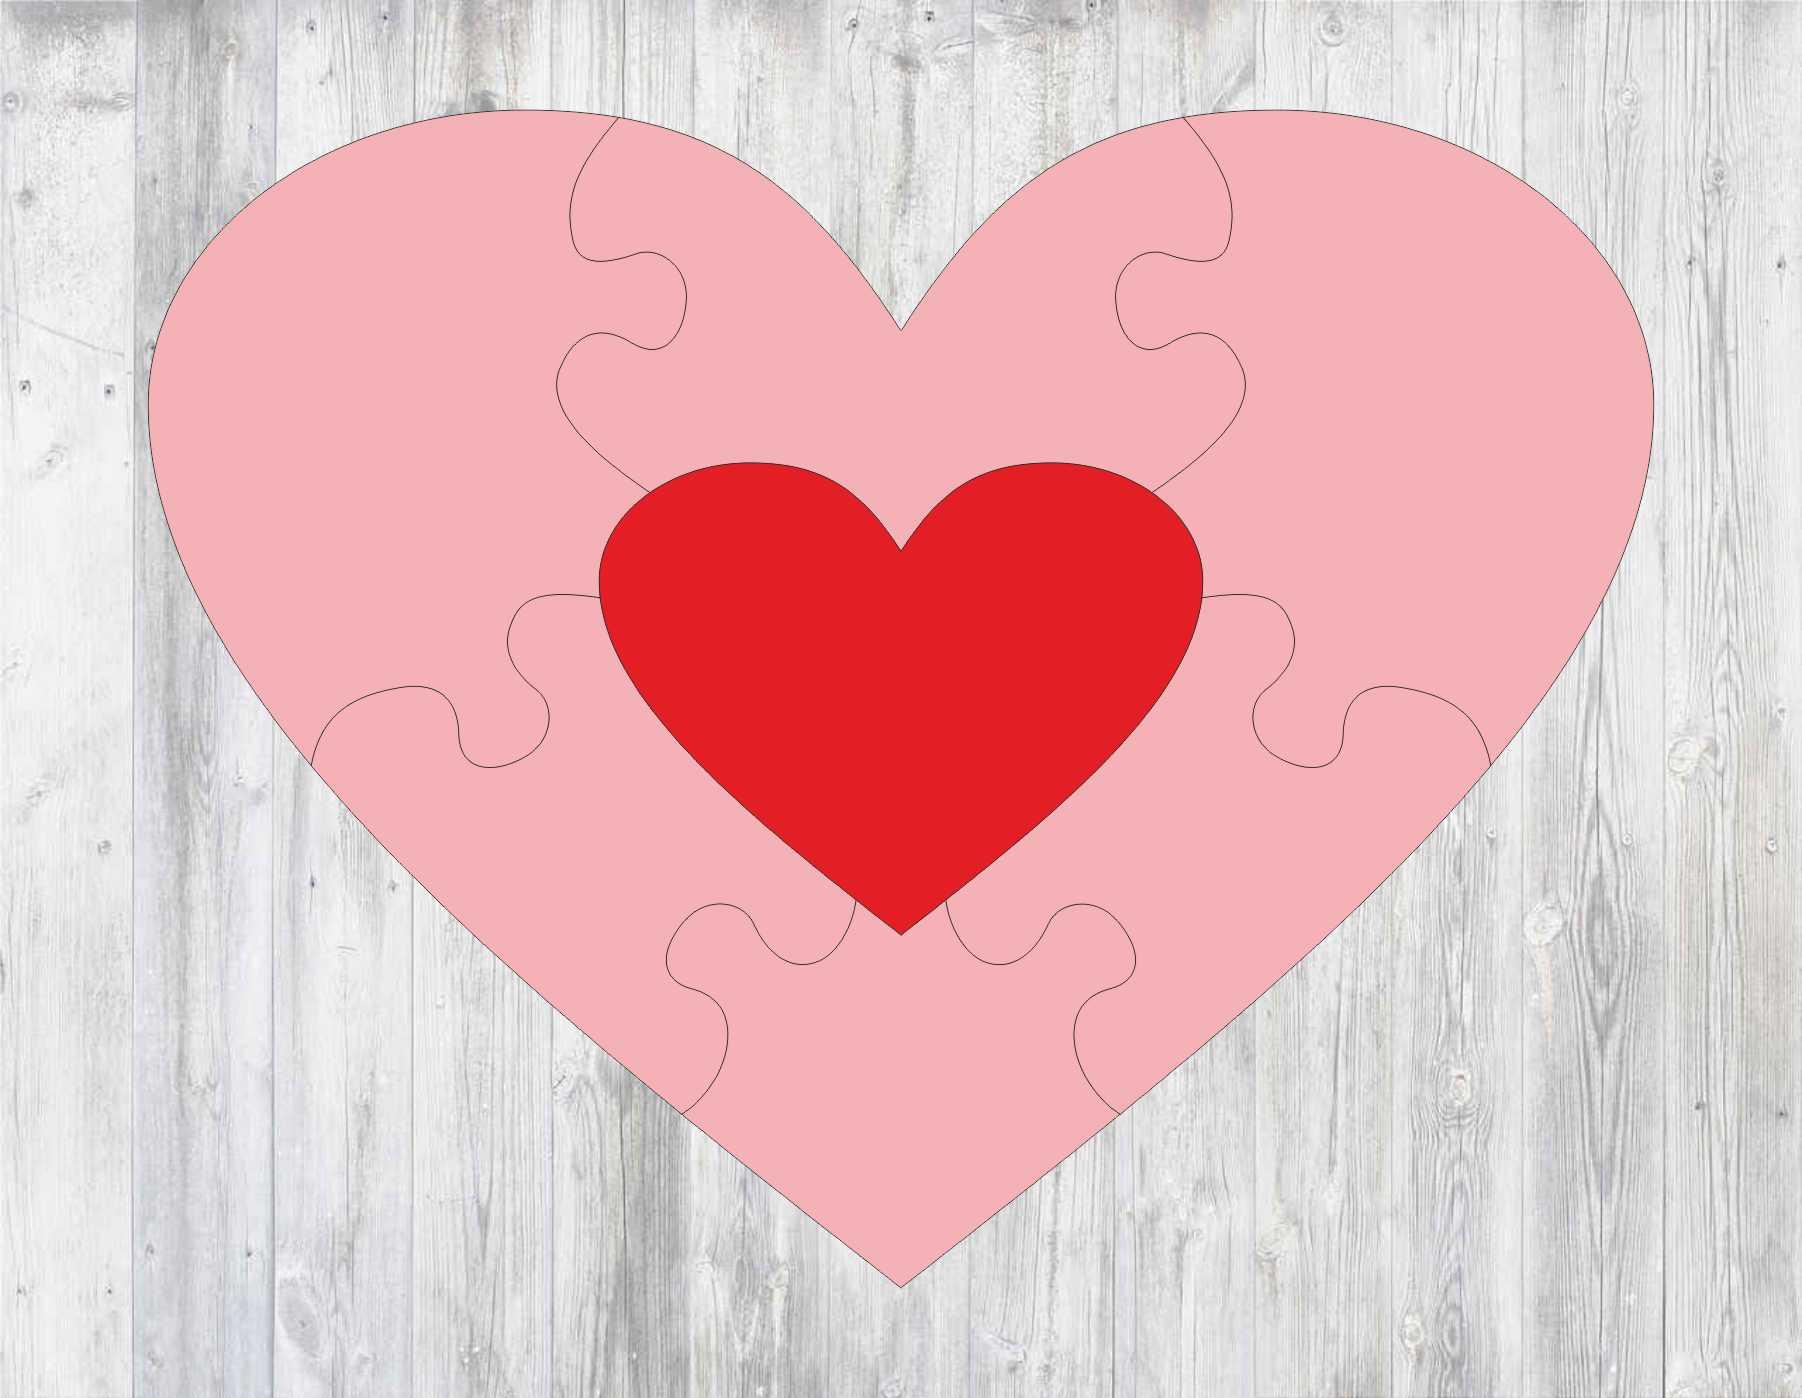 laser-cut-heart-puzzle-template-free-vector-cdr-file-free-download-vectors-file